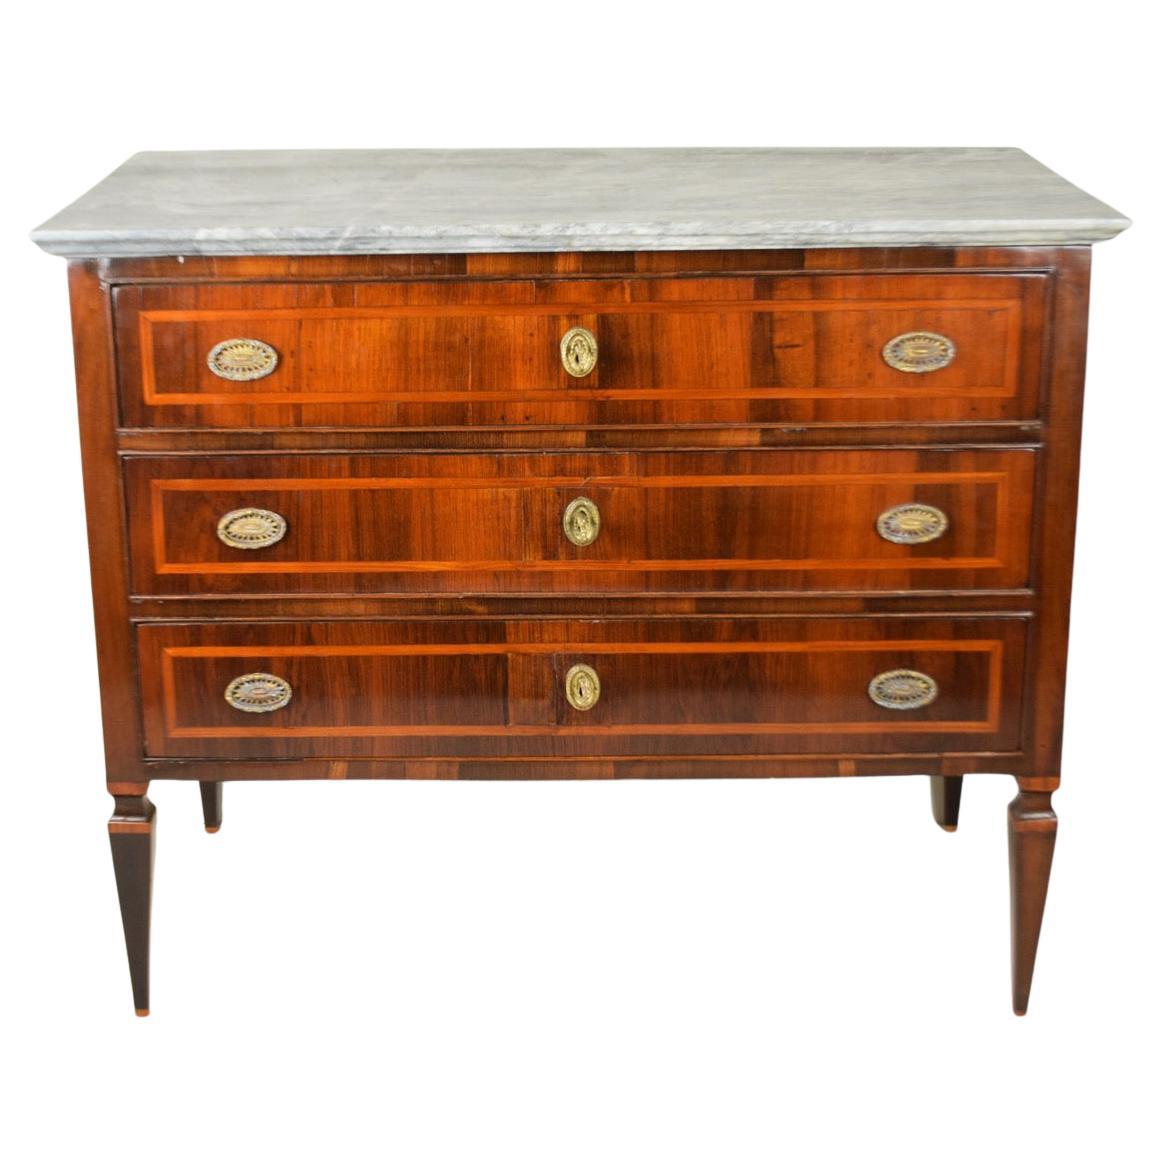 Louis XVI Chest of Drawers Veneered in Rosewood with Gray Marble Top